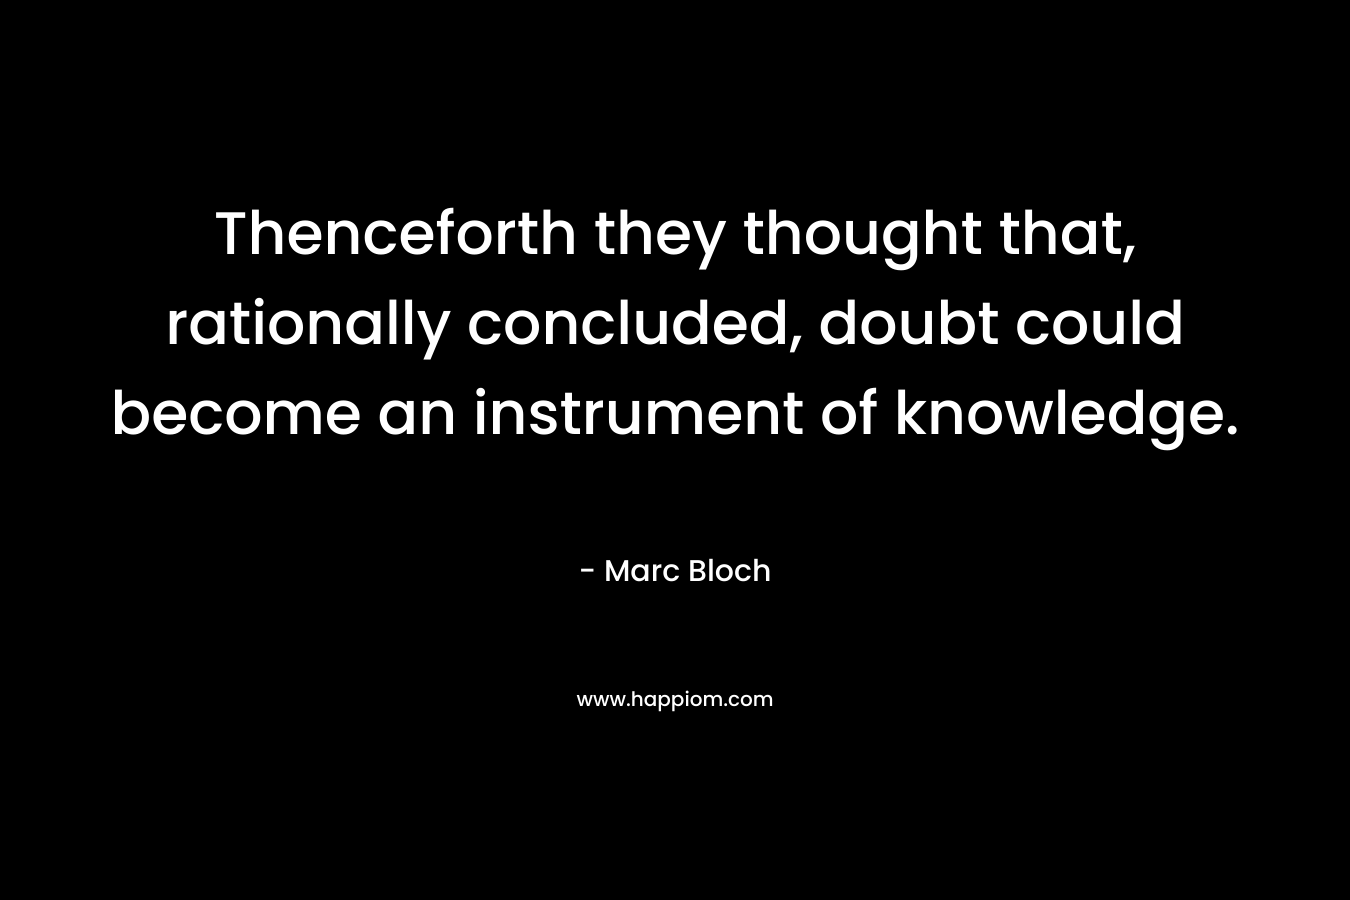 Thenceforth they thought that, rationally concluded, doubt could become an instrument of knowledge. – Marc Bloch